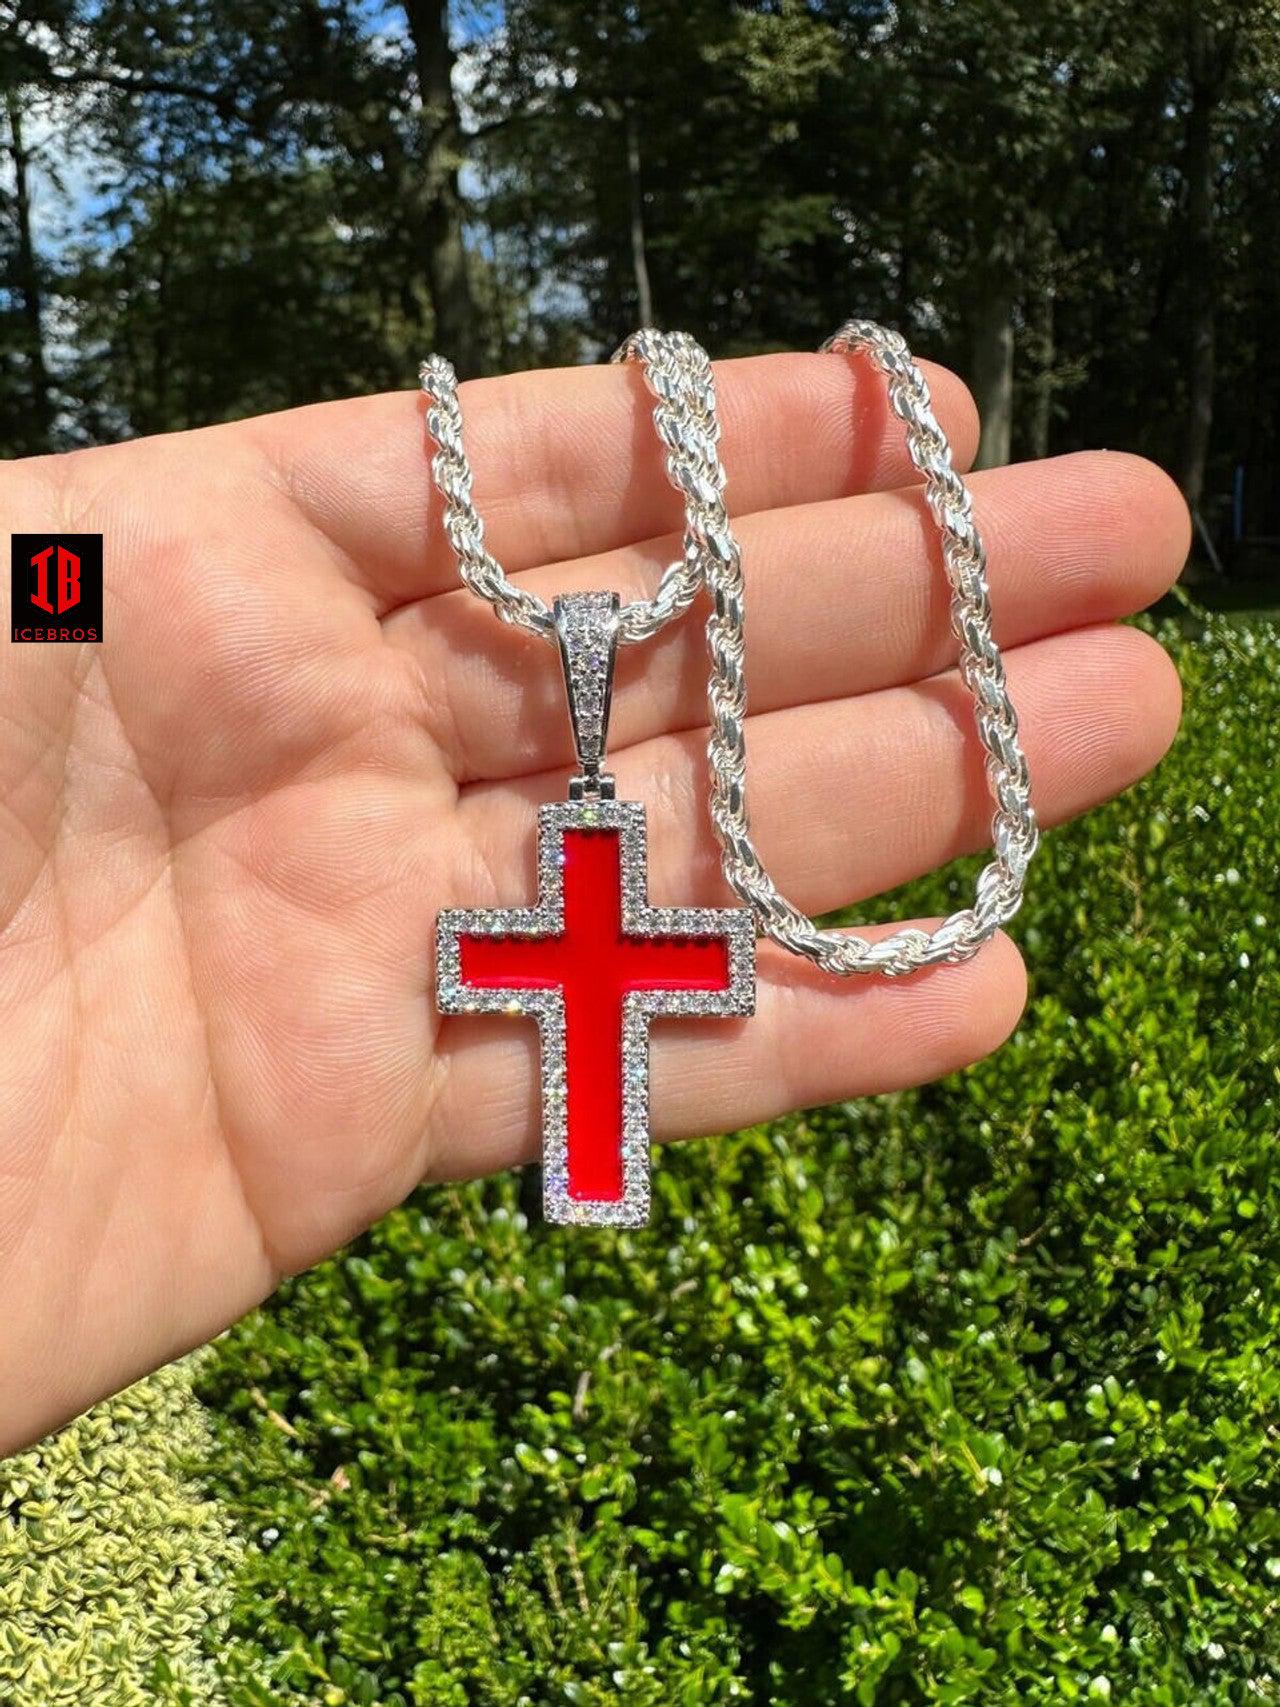 MOISSANITE Cross Pendant Iced Necklace Blood Red Enamel Real 925 Silver 3 Sizes